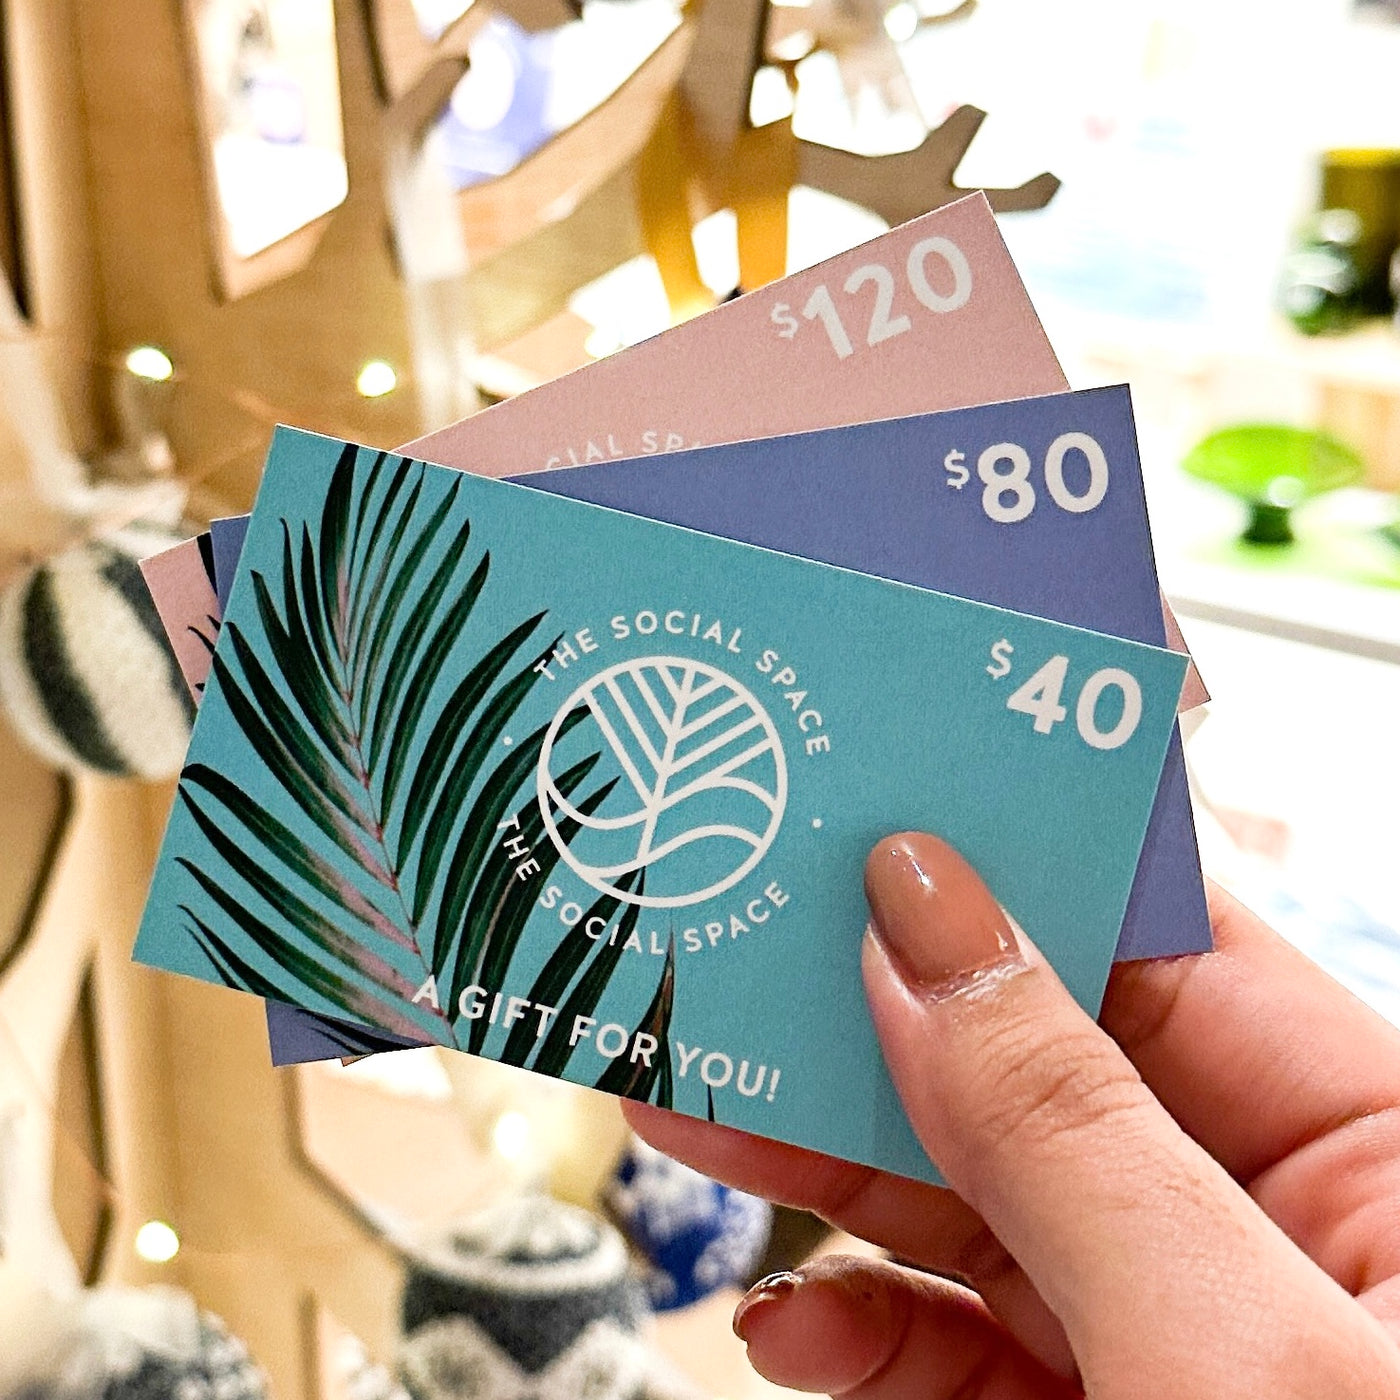 The Social Space Plantable Gift Cards